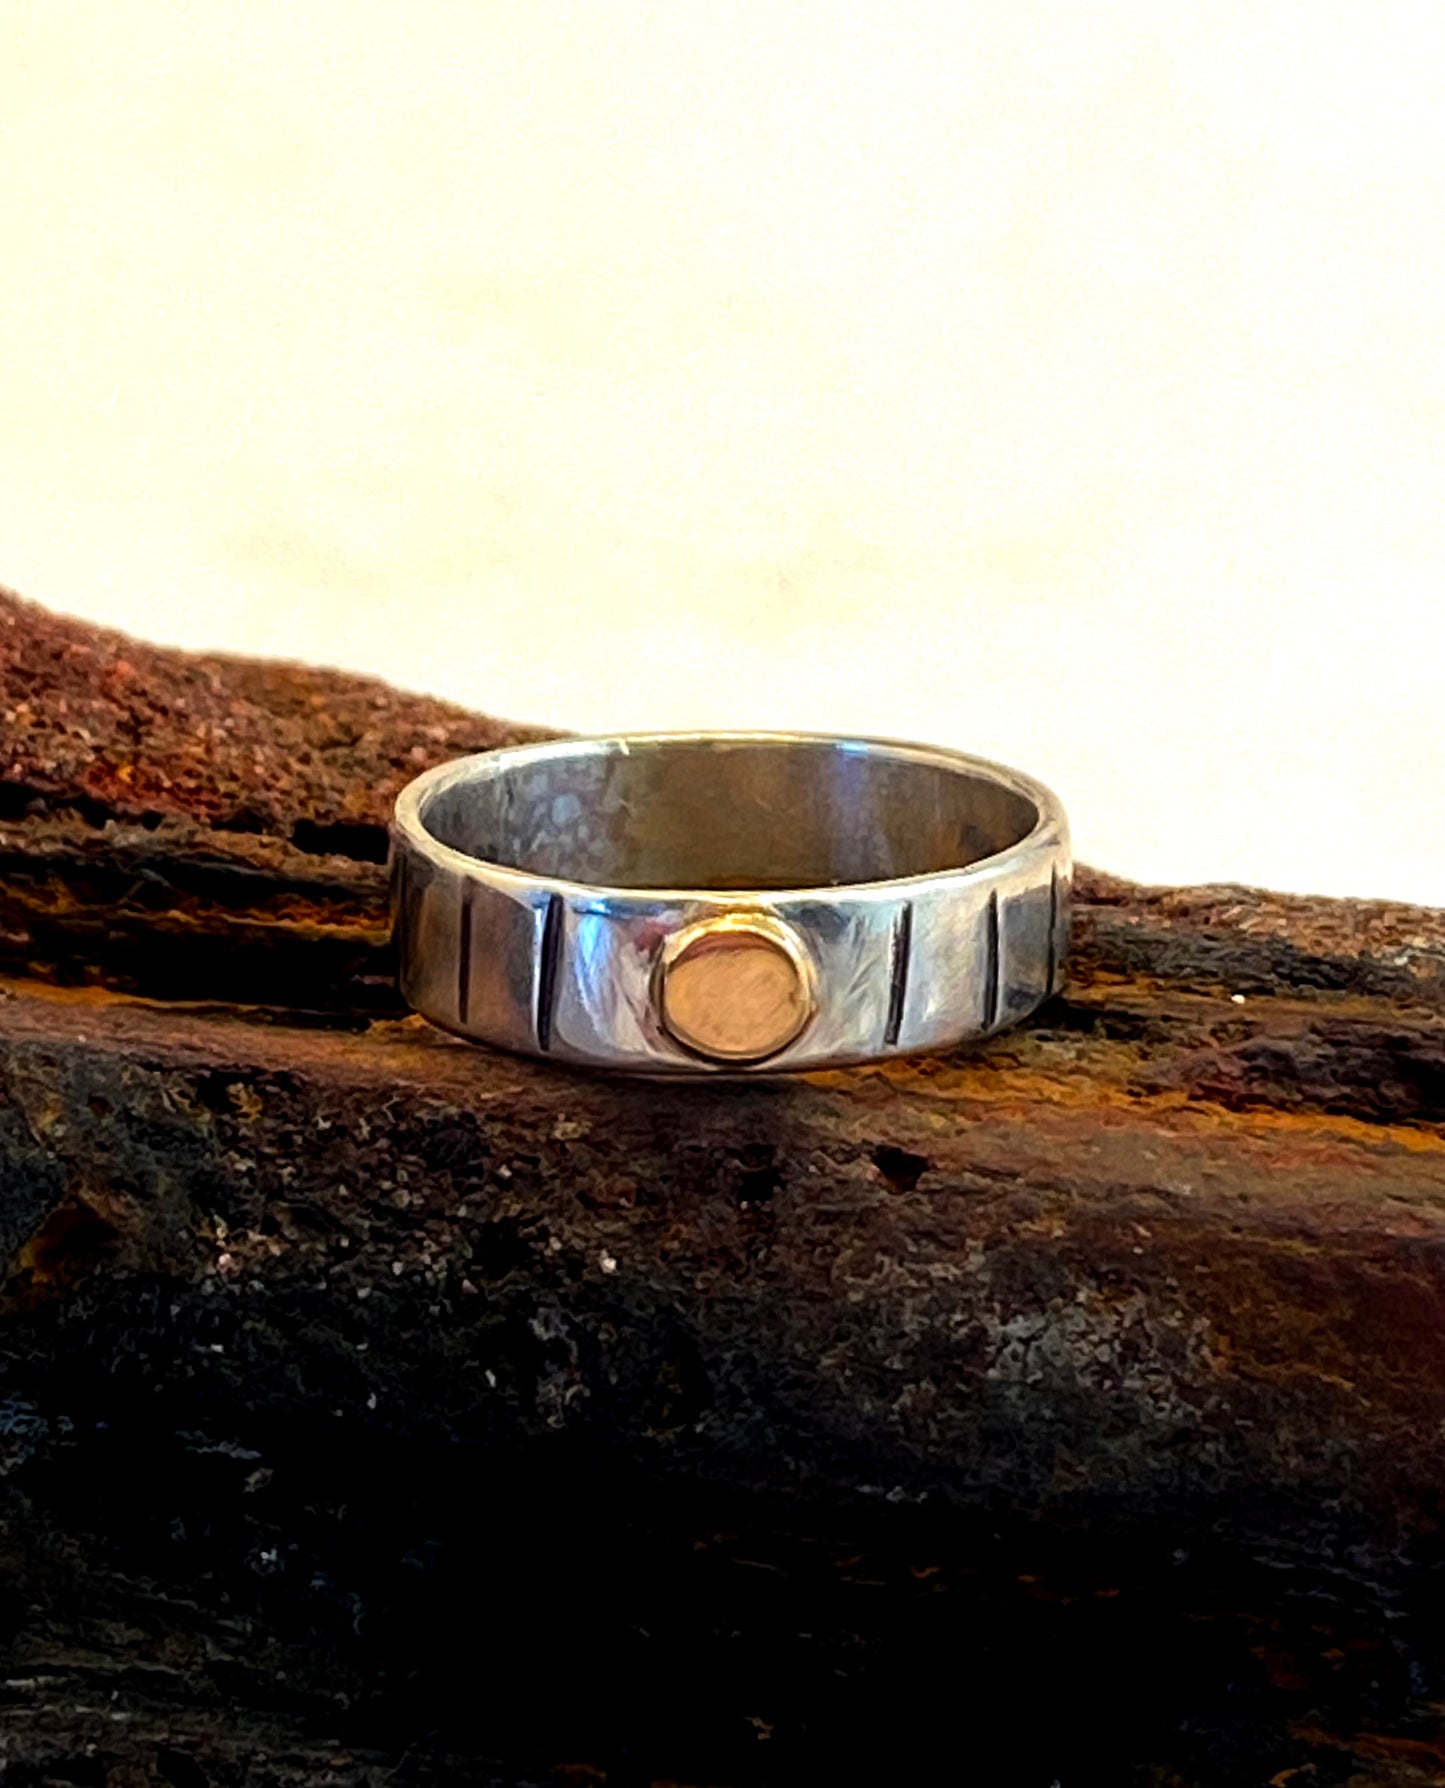      This one-of-a-kind sterling silver ring is adorned with a 14k gold disk and a stamped line pattern around the band.      Ring size 6-14.  Band is 3/16" wide.     Style: rustic, boho, funky, organic, earthy yet elegant